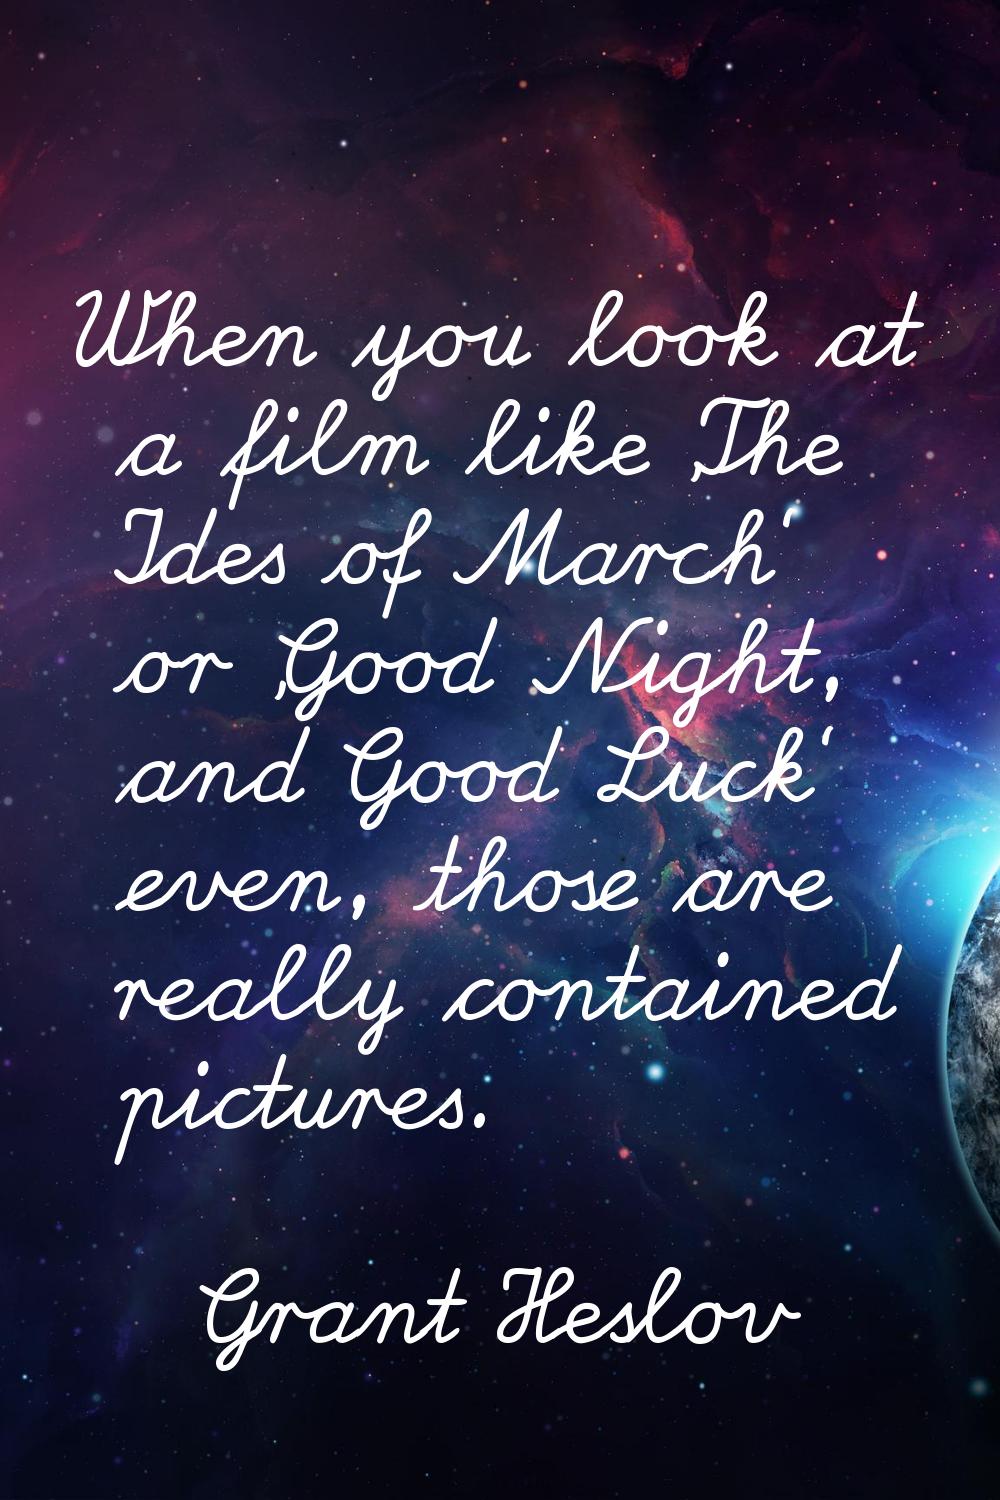 When you look at a film like 'The Ides of March' or 'Good Night, and Good Luck' even, those are rea